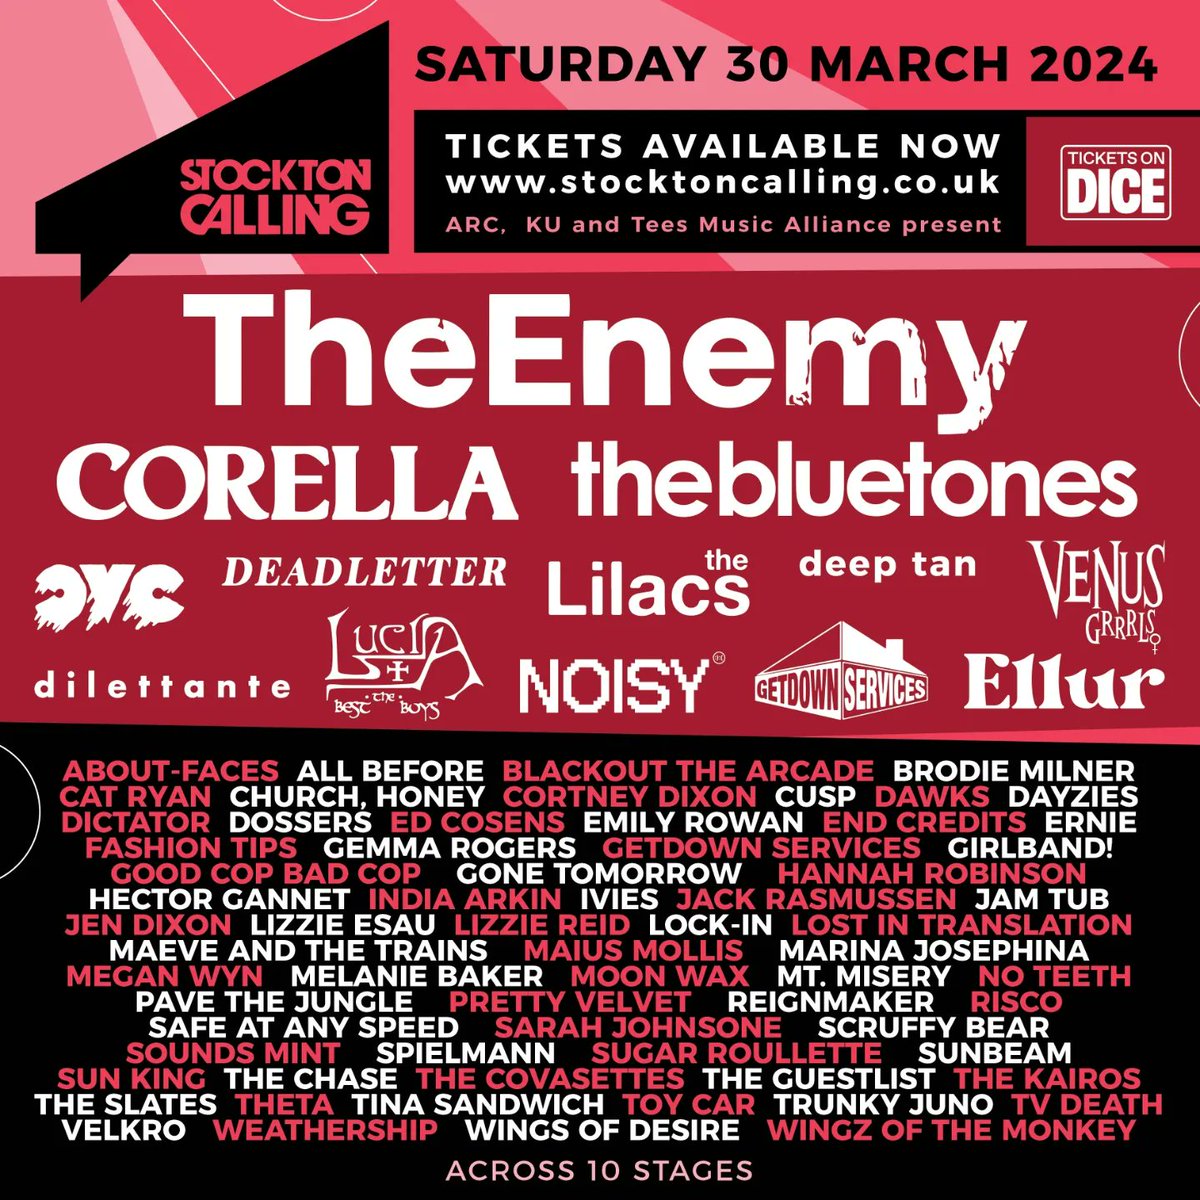 Full line up for @StocktonCalling 2024 is up! Very excited to be a part of this, see you at @arcstockton Arts Centre on 30th March!

🎟 stocktoncalling.co.uk

#LO143 #hectorgannet #stocktonartscentre #stockton #stocktoncalling #andthewhitehorses #arcstockton